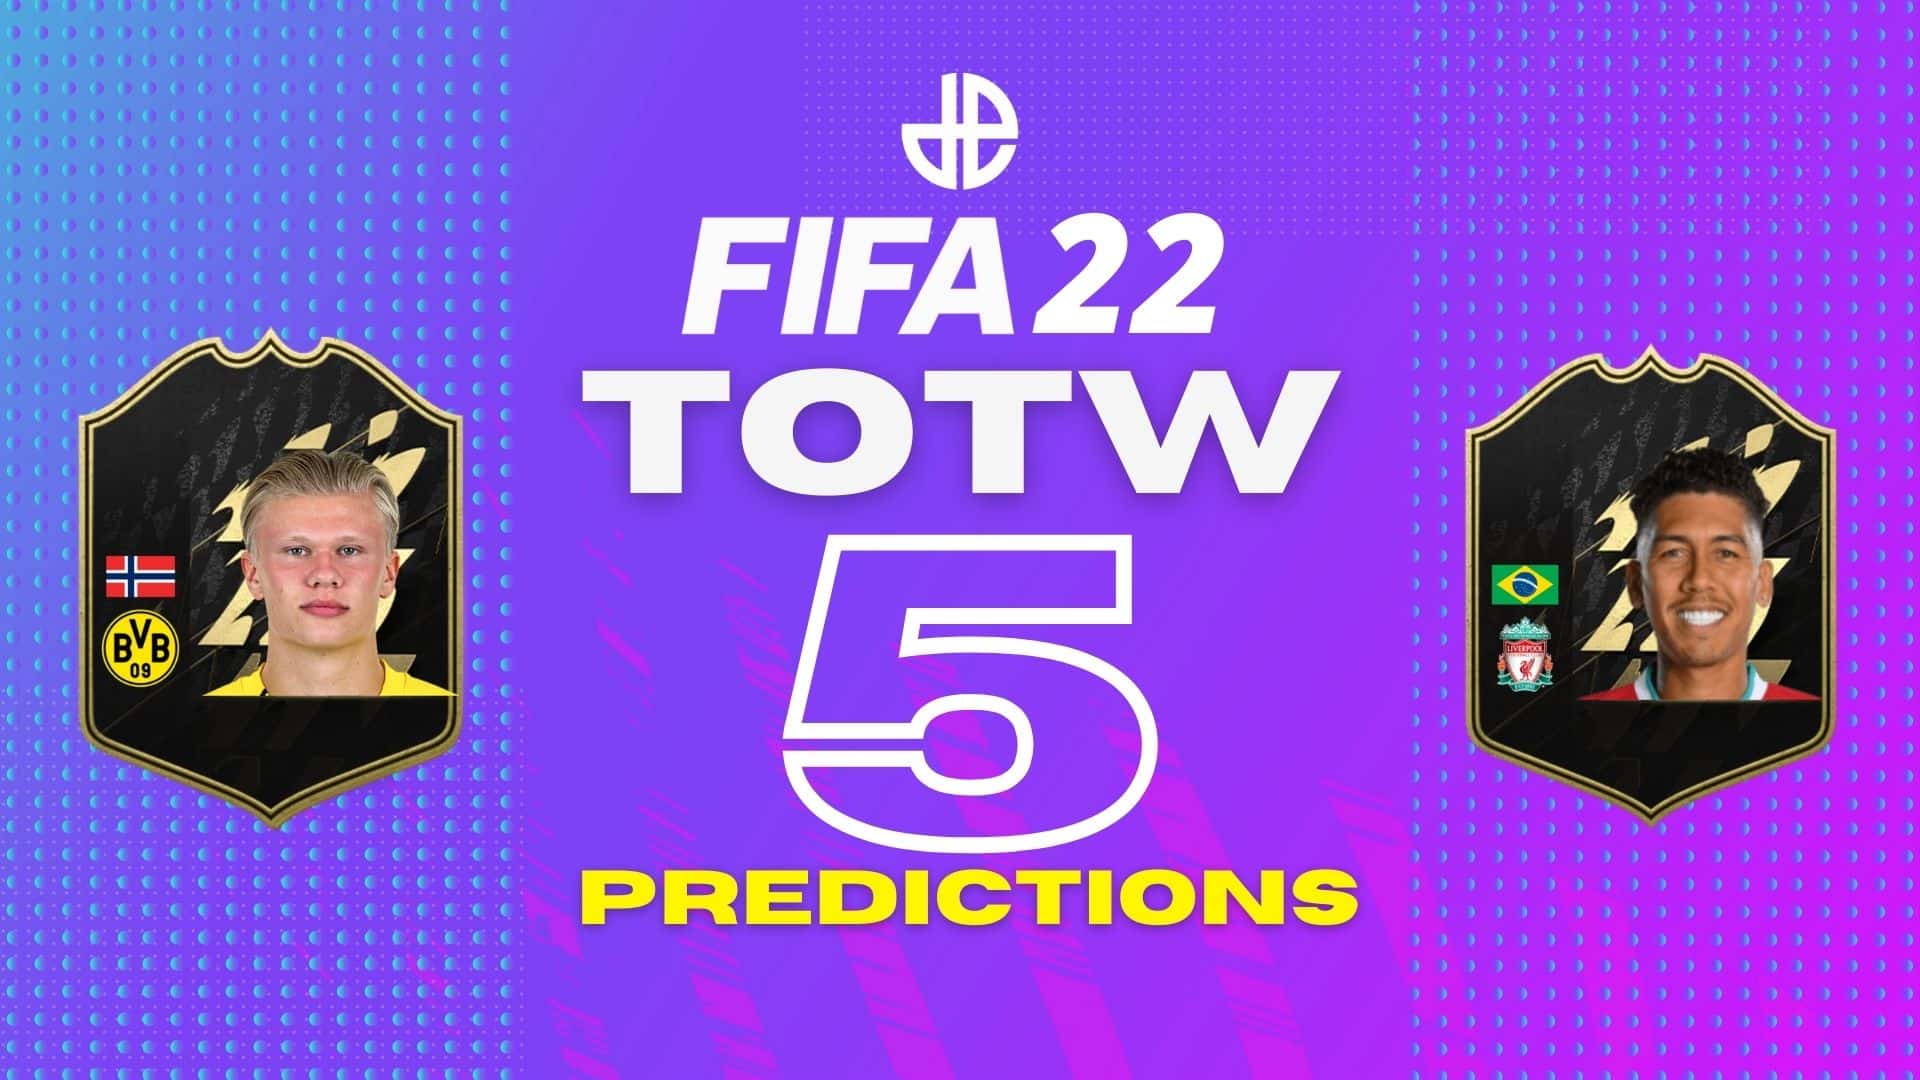 FIFA 22 TOTW 5 predictions with Haaland and Firmino cards